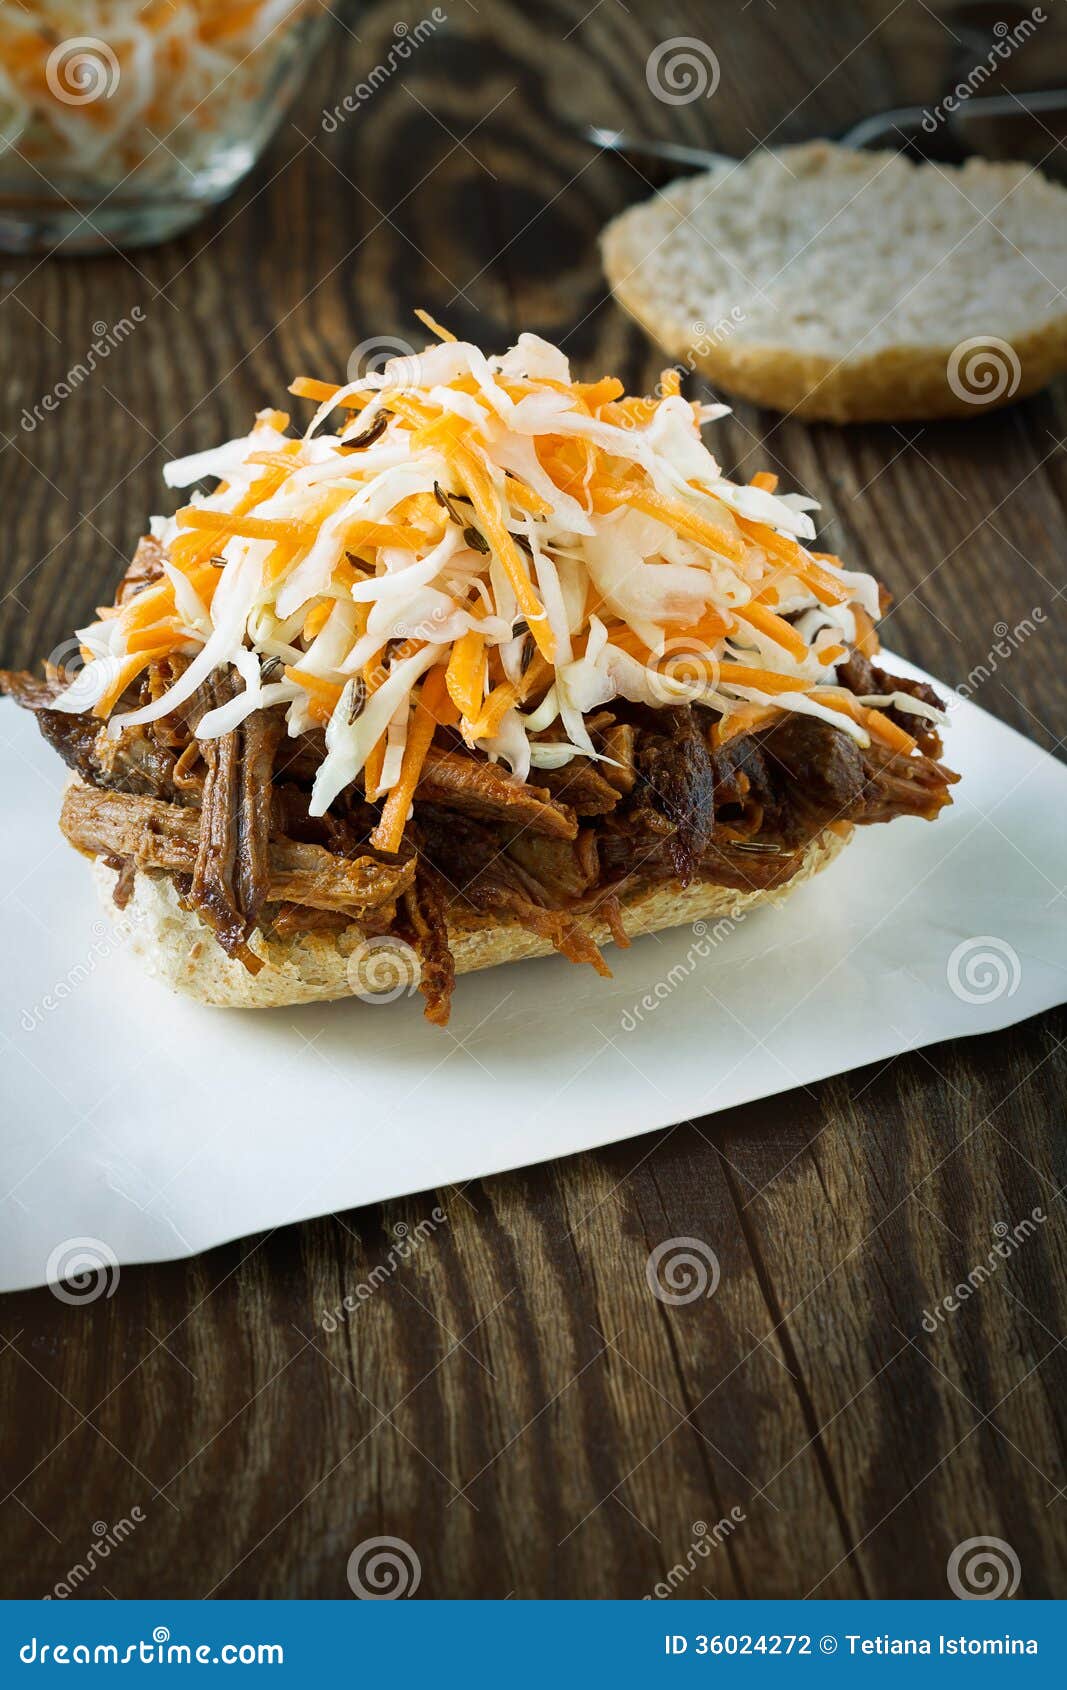 Pulled Pork Barbecue Sandwich with Cole Slaw Stock Photo - Image of ...